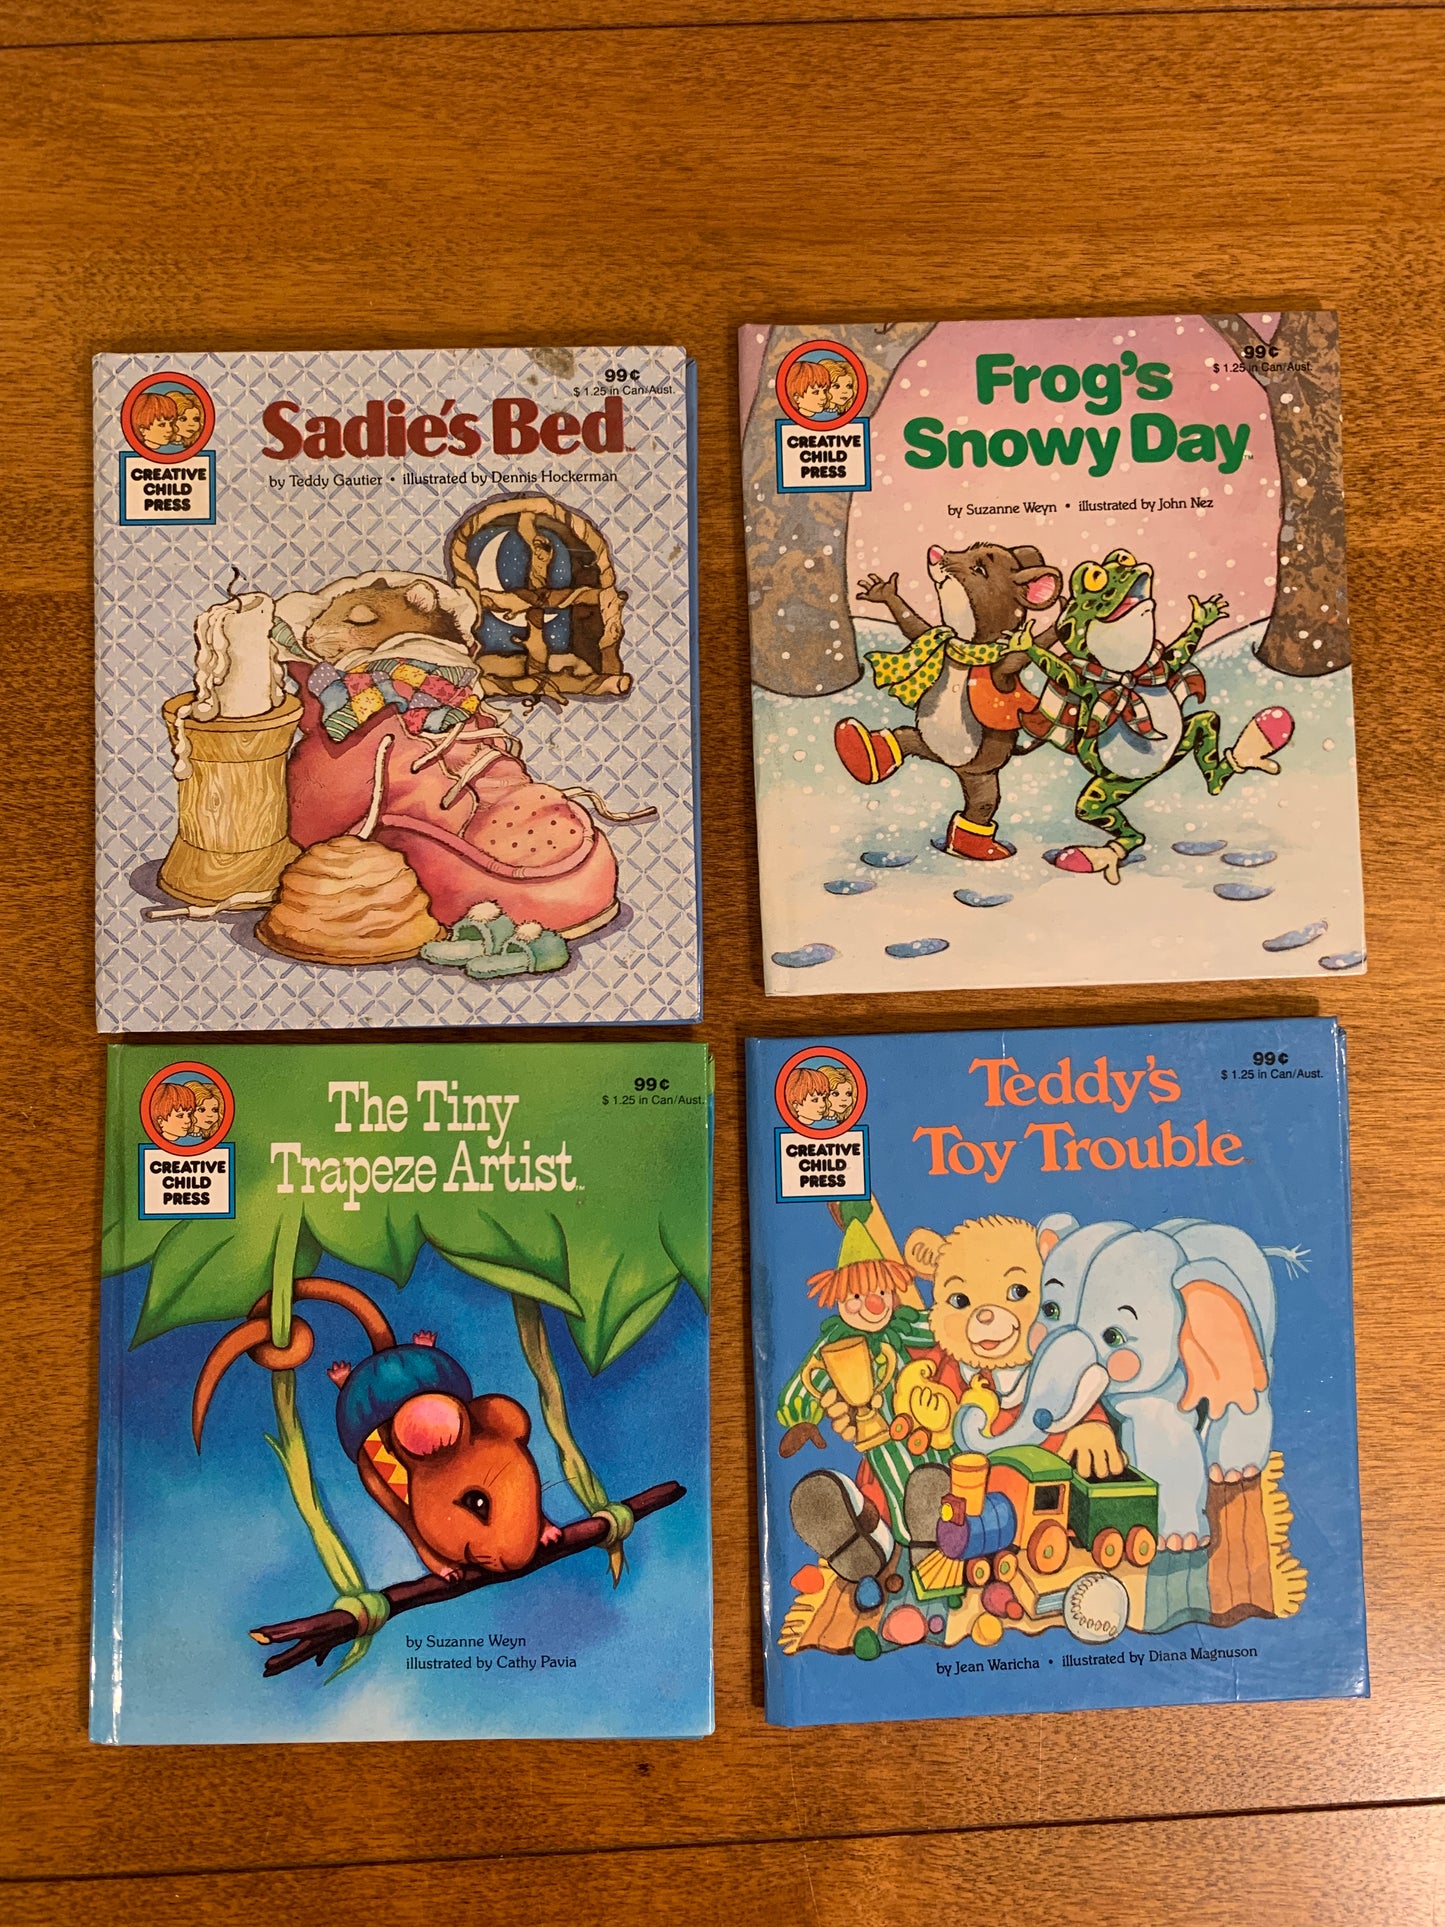 Ceative Child Press - Lot of 4